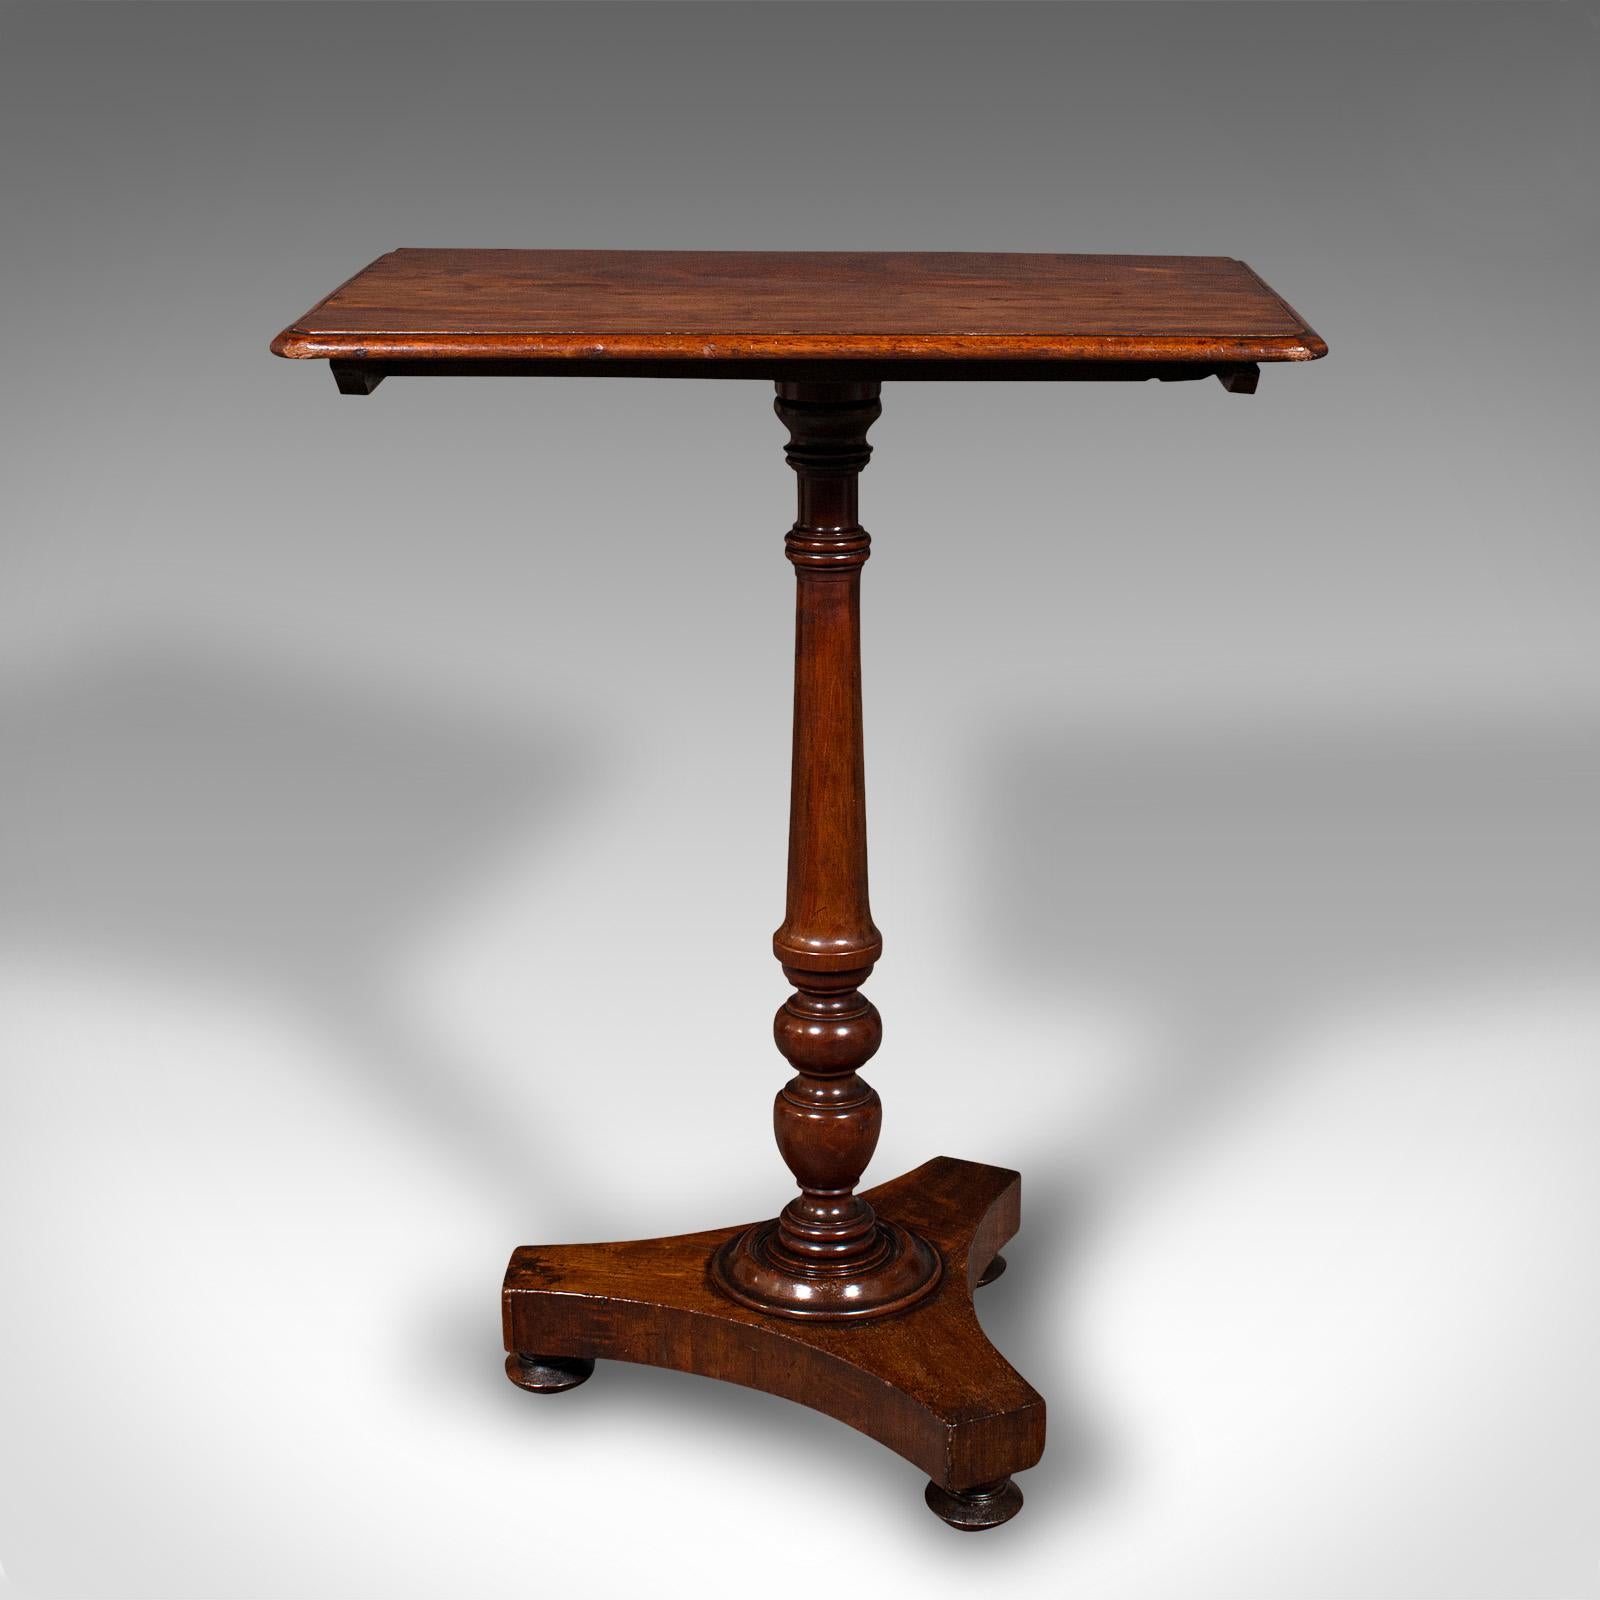 Antique Tilting Lamp Table, English, Flame, Occasional, Side, Regency circa 1820 For Sale 2